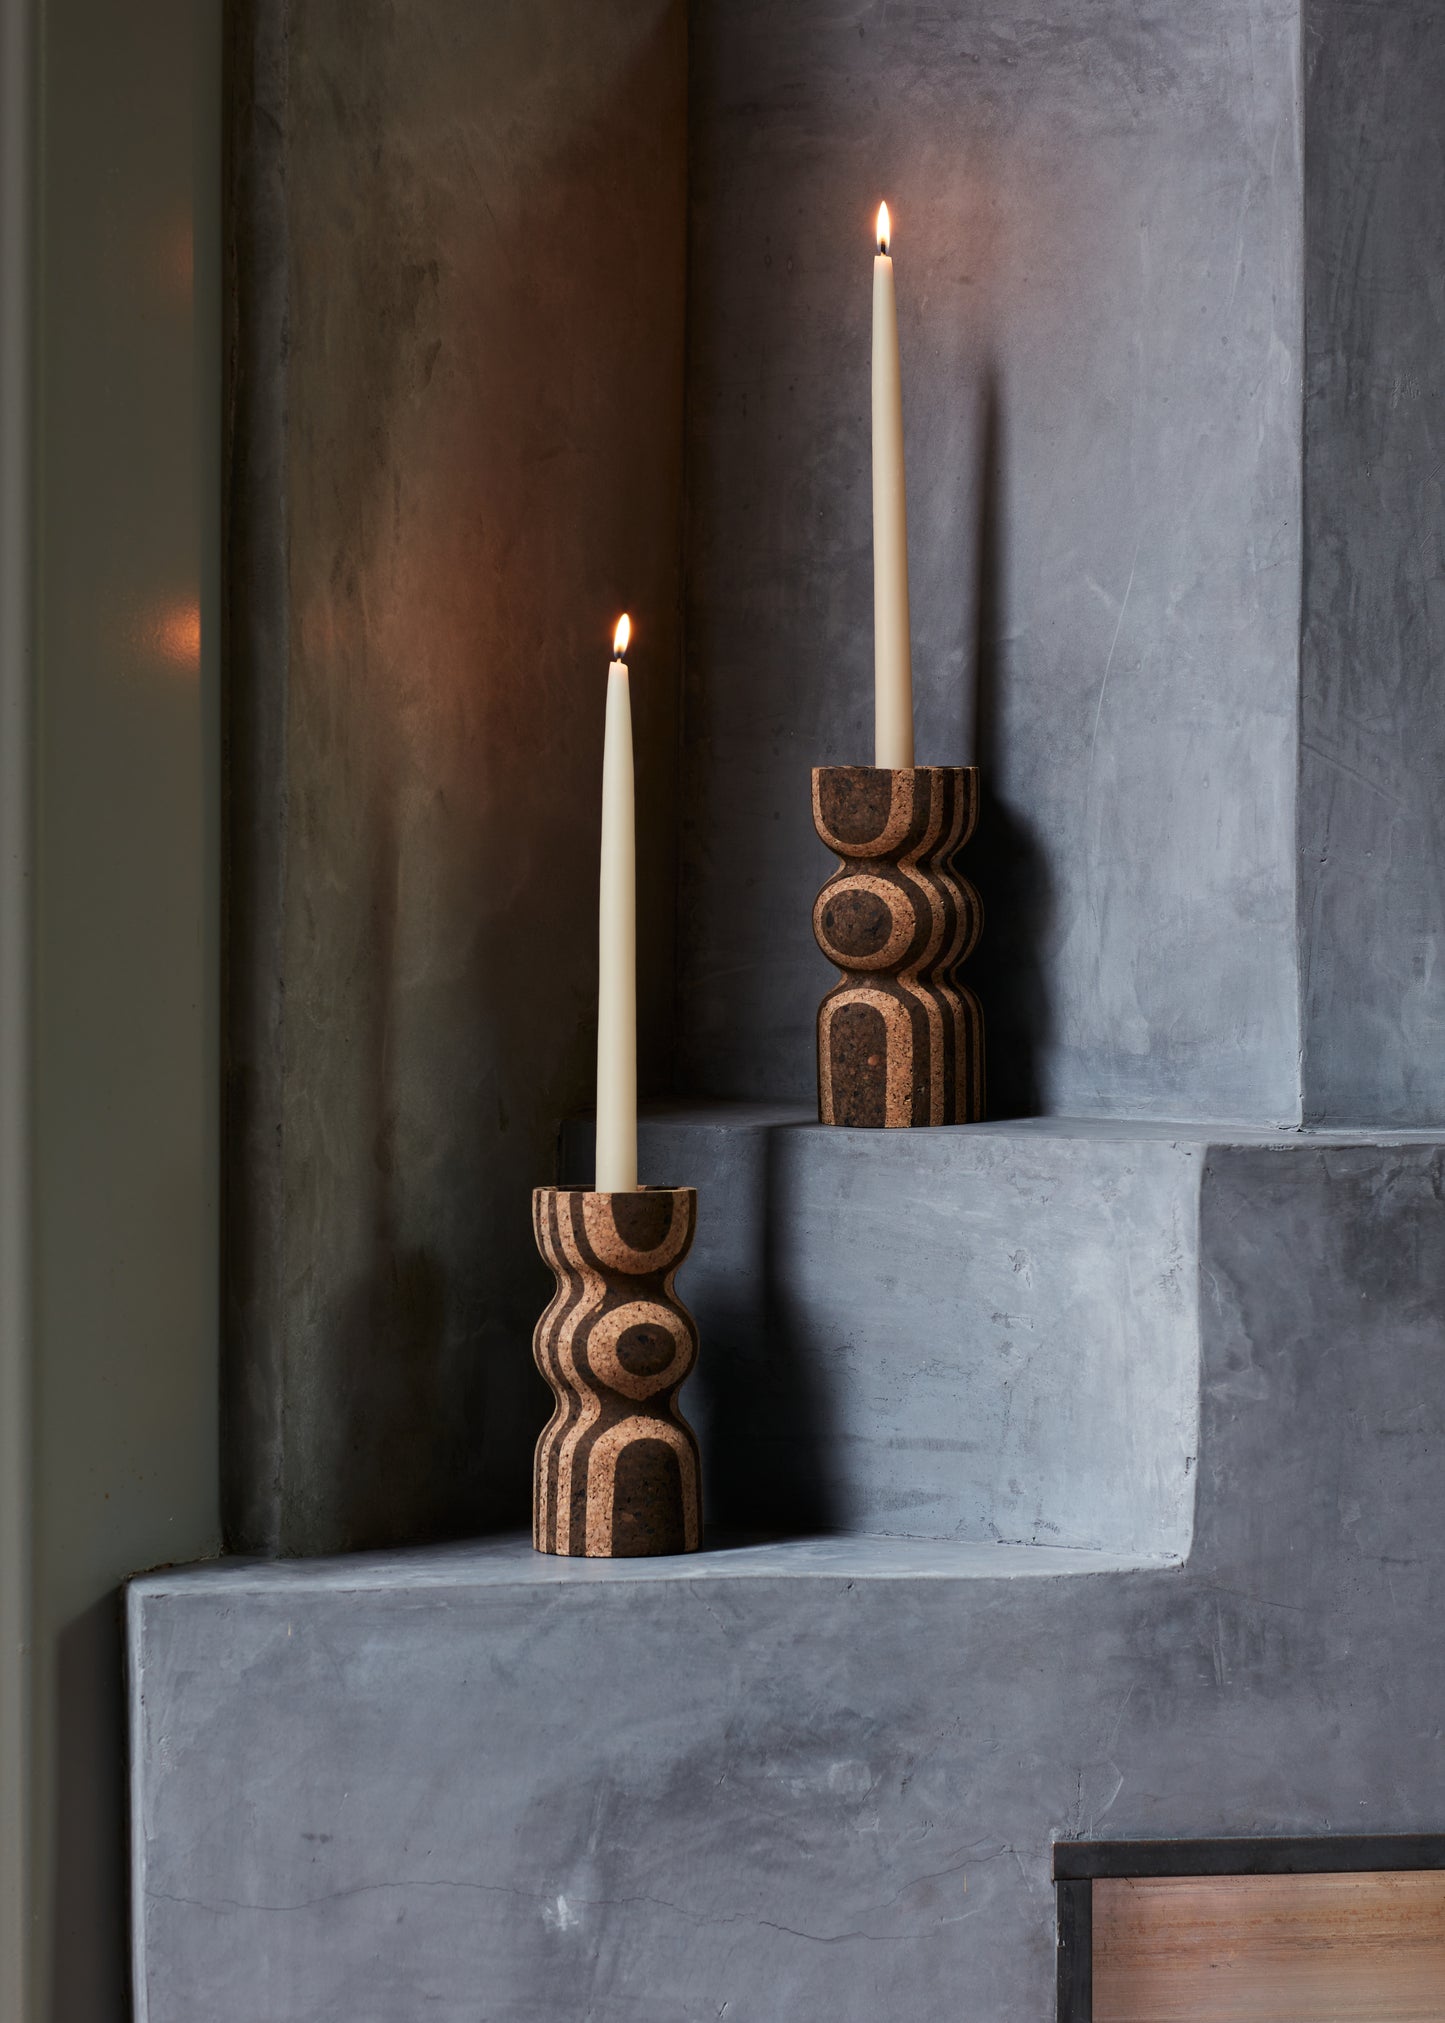 Anni Tall Striped Cork Candle Holders shown elegantly on a fireplace mantel. Handmade by Melanie Abrantes Designs.